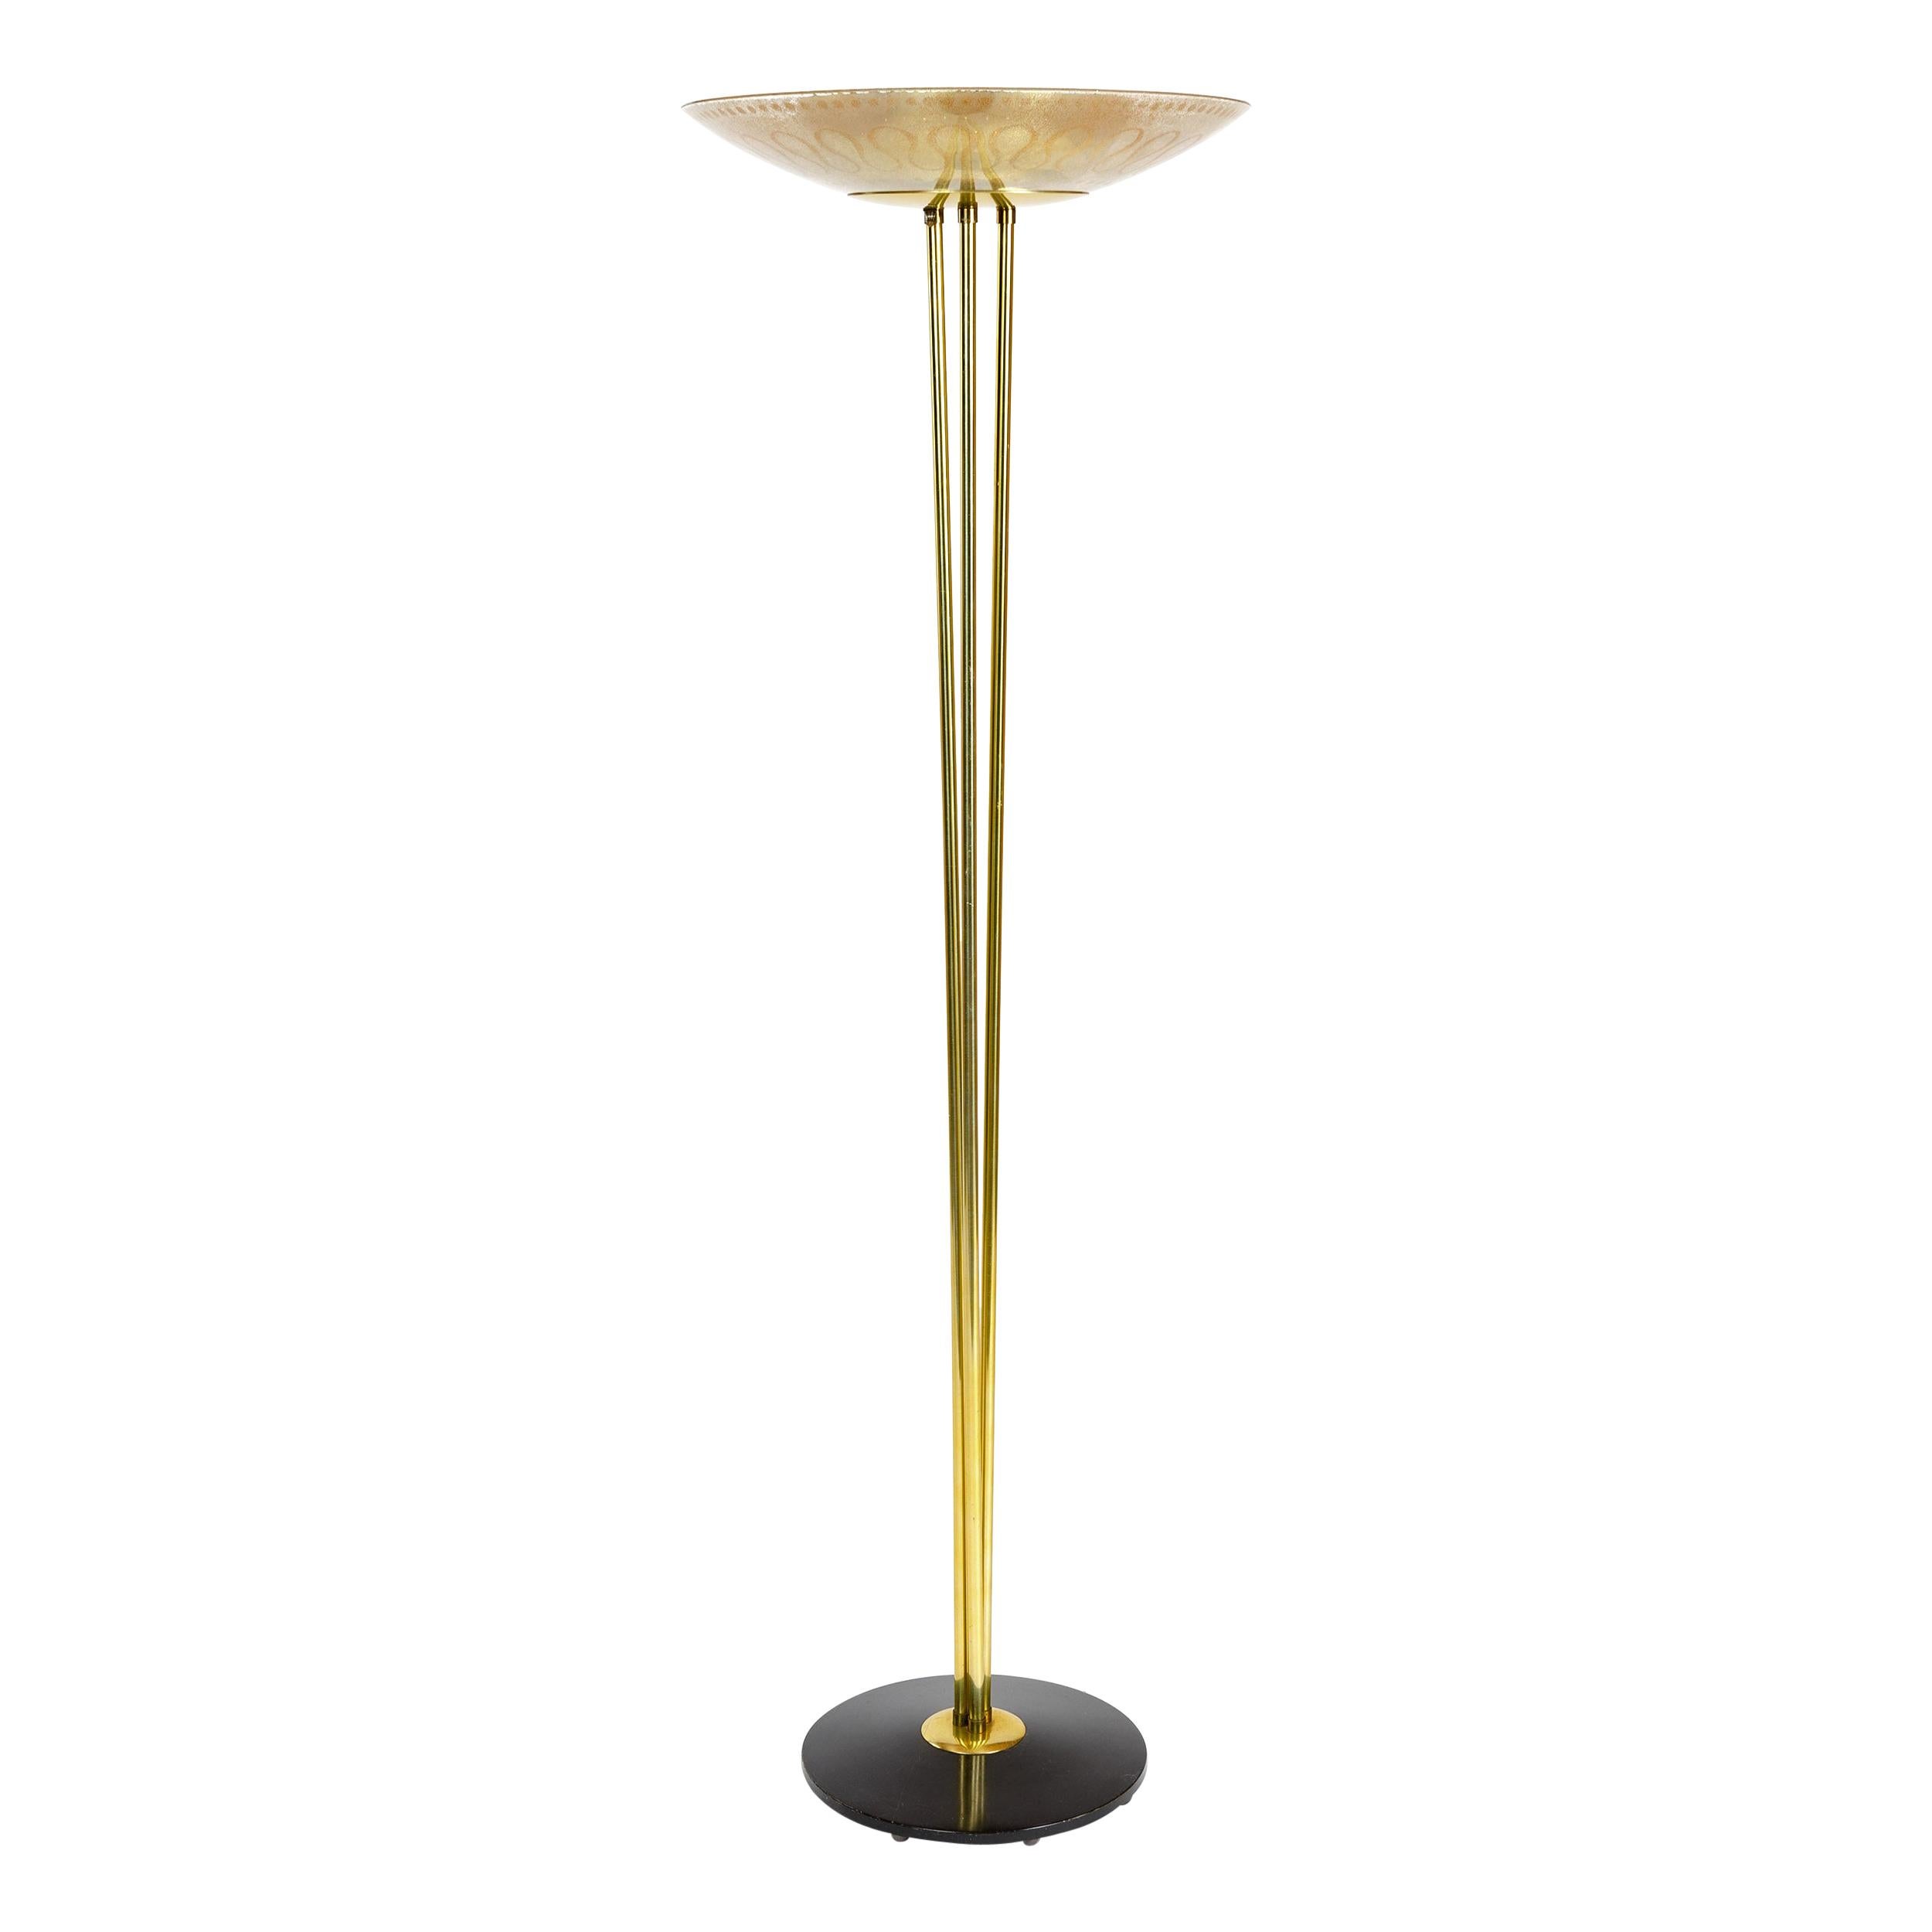 1950s Torchère Floor Lamp by Gerald Thurston for Lightolier